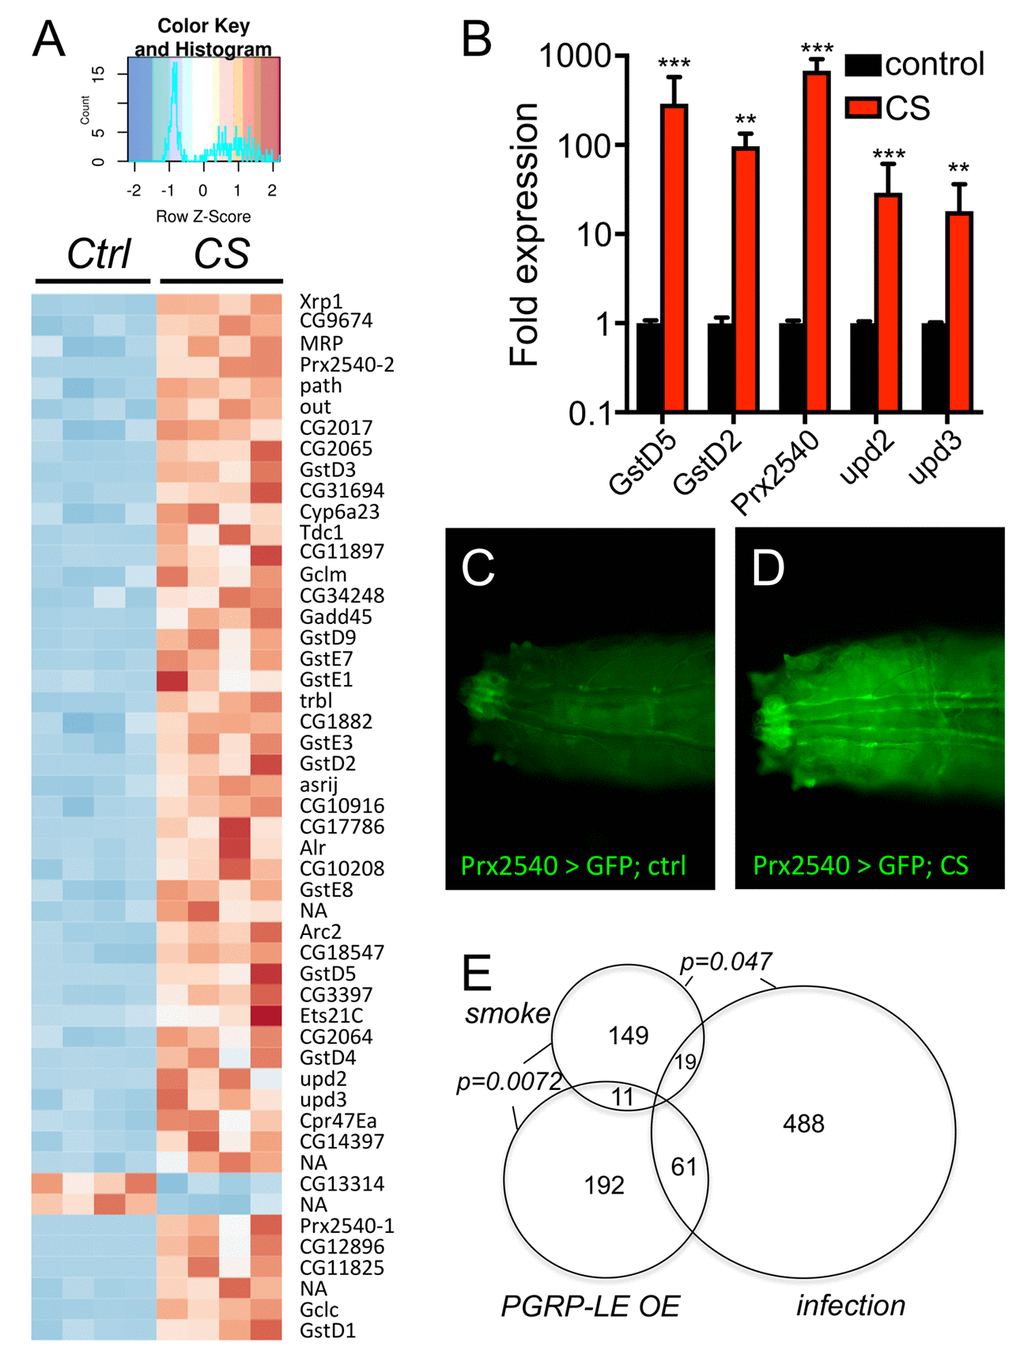 Transcriptomic analyses of CS exposed trachea from 3rd instar larvae. (A) RNA sequencing experiment of trachea derived from nontreated (control) and CS exposed animals (CS) revealed a total of 143 genes significantly upregulated and 36 genes significantly downregulated in response to CS exposure (pB). Transgenic animals carrying a Gal4 element under the control of the presumptive Prx2540 promoter (C, D) crossed to UAS-GFP flies and not exposed to CS (C) or exposed to CS (D). (E) Venn diagram analyses of those genes that were significantly regulated in respinse to CS exposure (smoke) compared with those regulated in response to infection (infection) and those regulated in response to ectopic PGRP-LE expression (PGRP-LE OE).